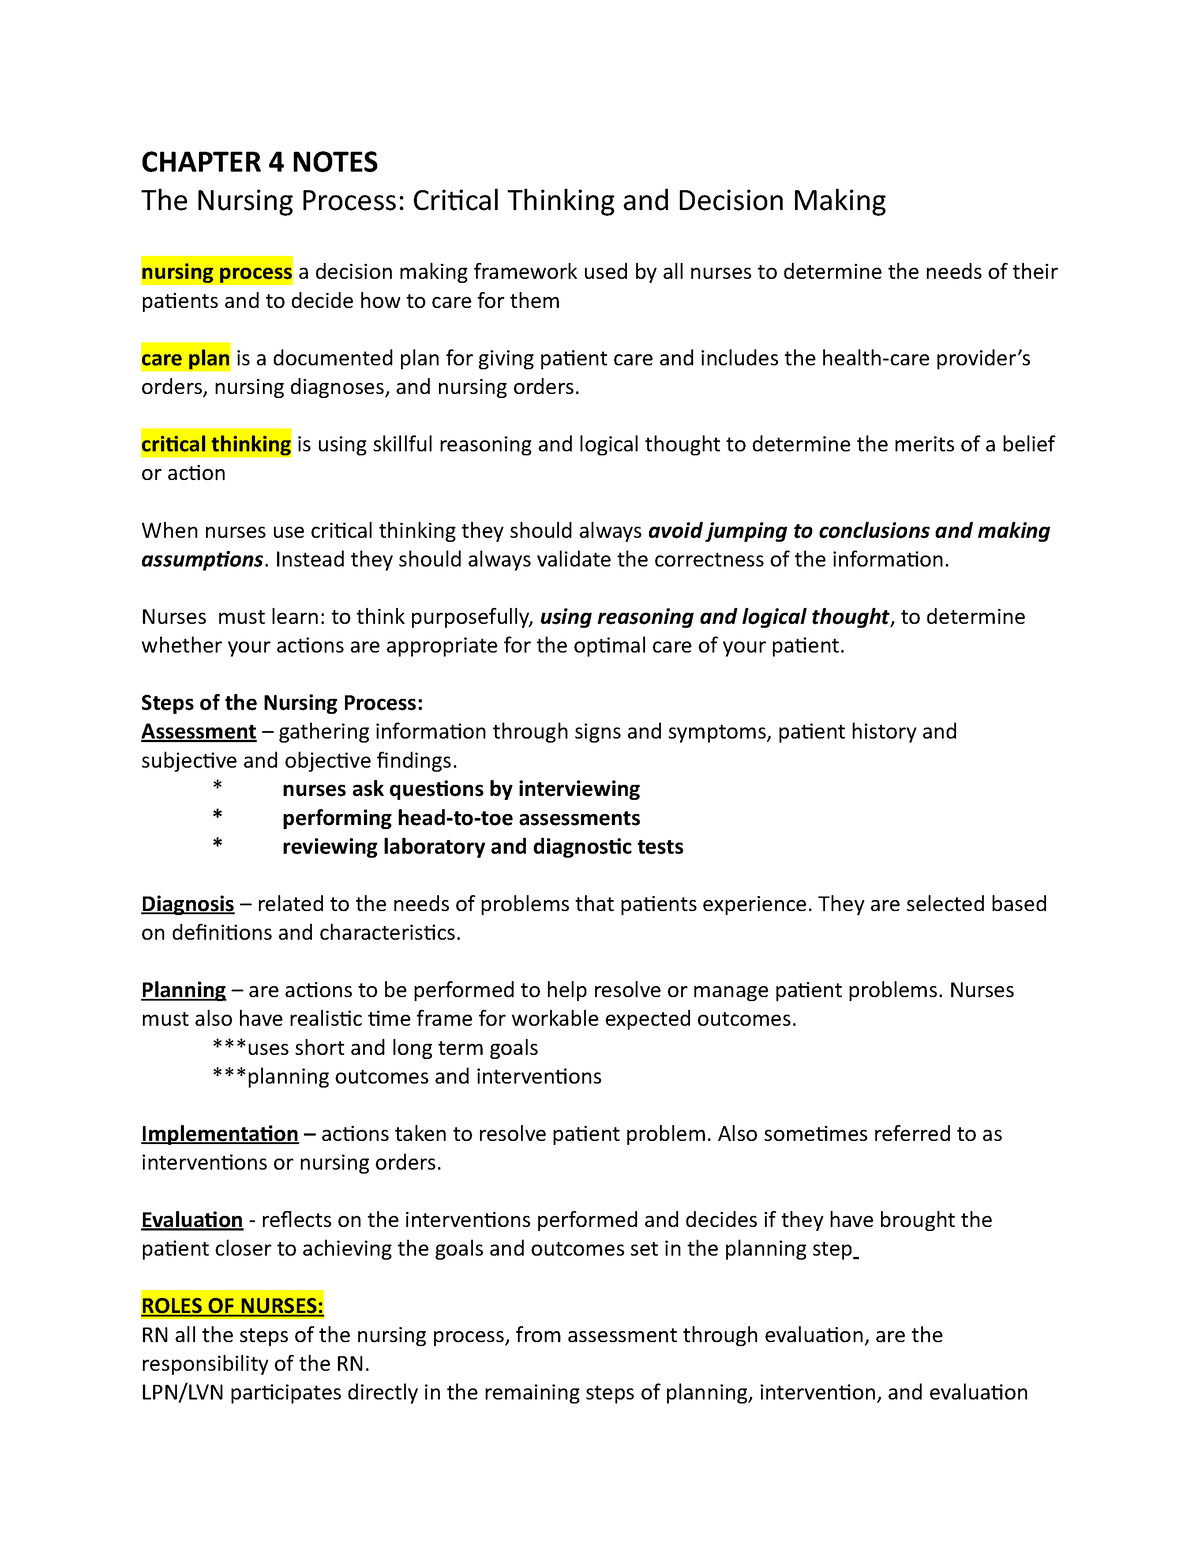 the nursing process and critical thinking chapter 4